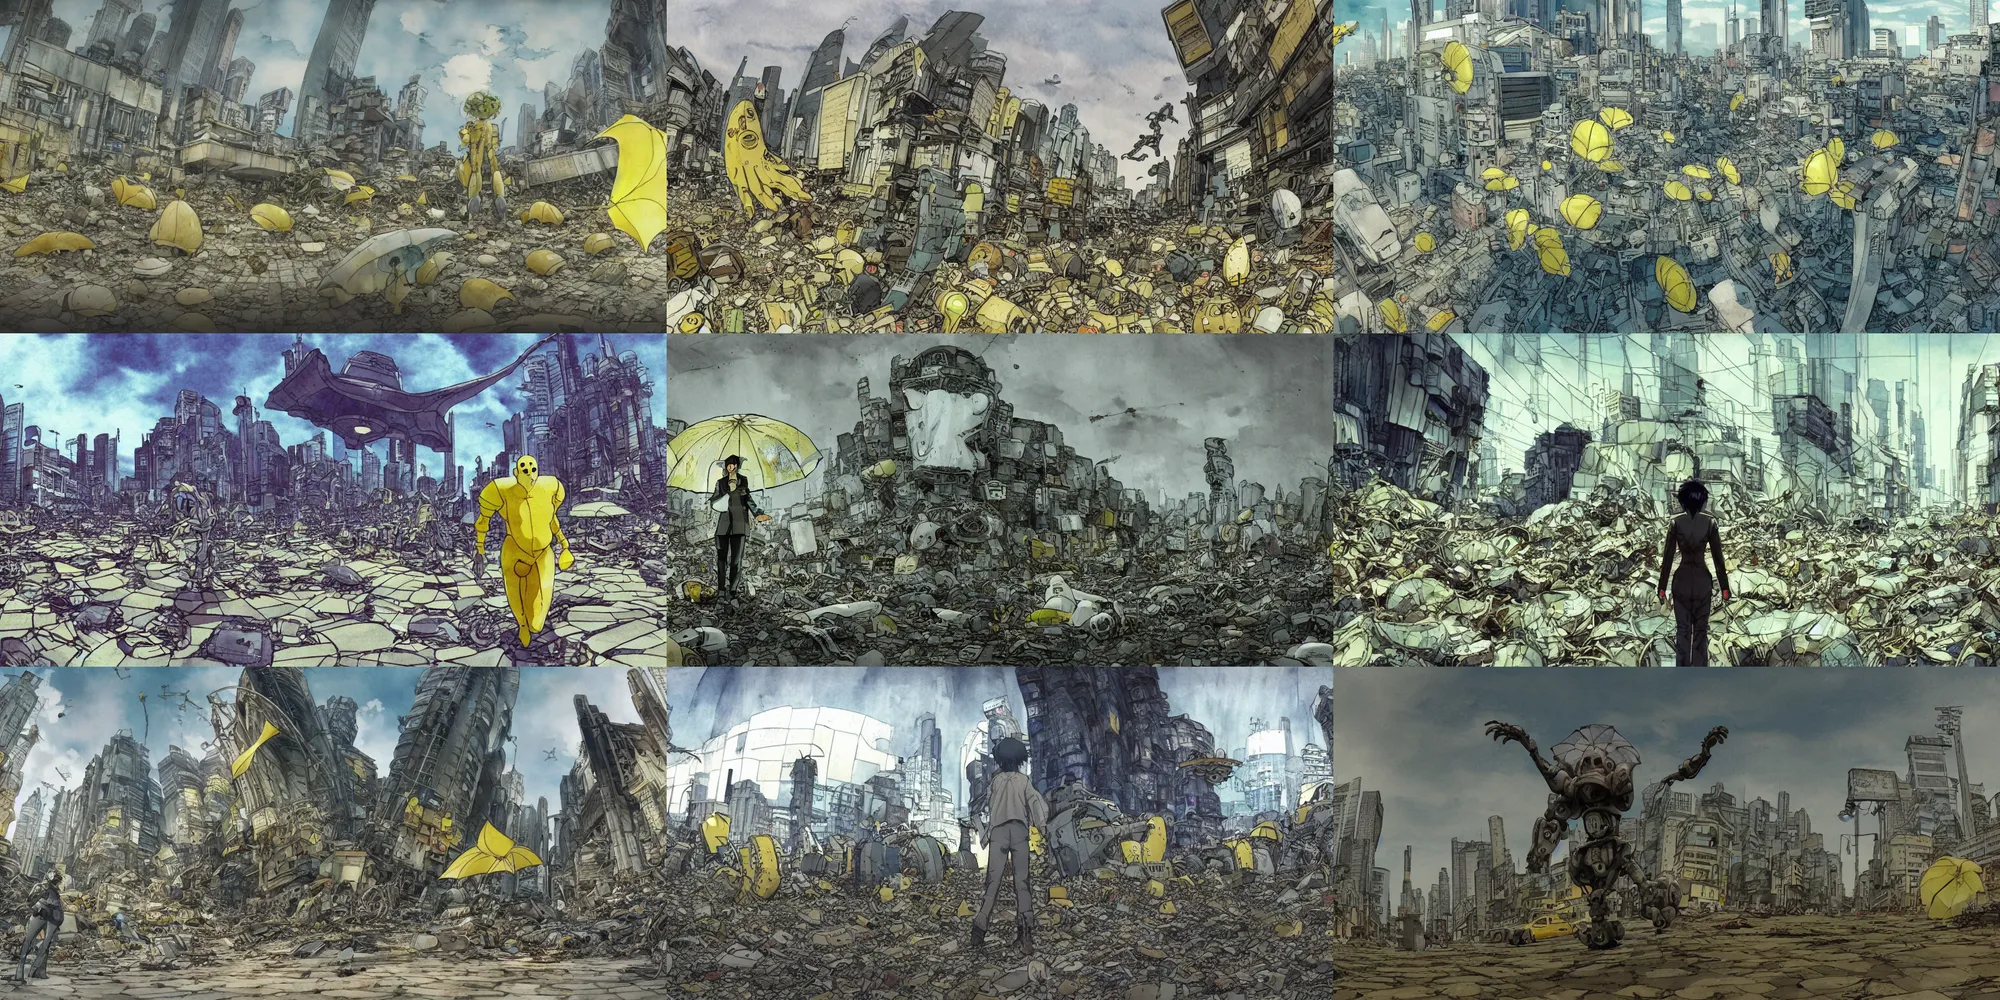 Prompt: incredible curvelinear perspective screenshot, ultrawide fish eye lens, detailed, simple watercolor, watercolor paper, rough paper texture yellow parasol, masamune shirow ghost in the shell movie, katsuhiro otomo akira movie scene, forced perspective kaiju hand, graveyard, scrapyard, robot arm bursting from the ground, zombie reaching out of a grave, robot art cracking the road, robot arm stretching into the sky, robot arm skeleton, robot arm reaching out of the grave, backlit people run in the foreground, rim light, hawken, genius party,shinjuku, koju morimoto, katsuya terada, masamune shirow, tatsuyuki tanaka hd, 4k, remaster, dynamic camera angle, deep 3 point perspective, fish eye, dynamic scene